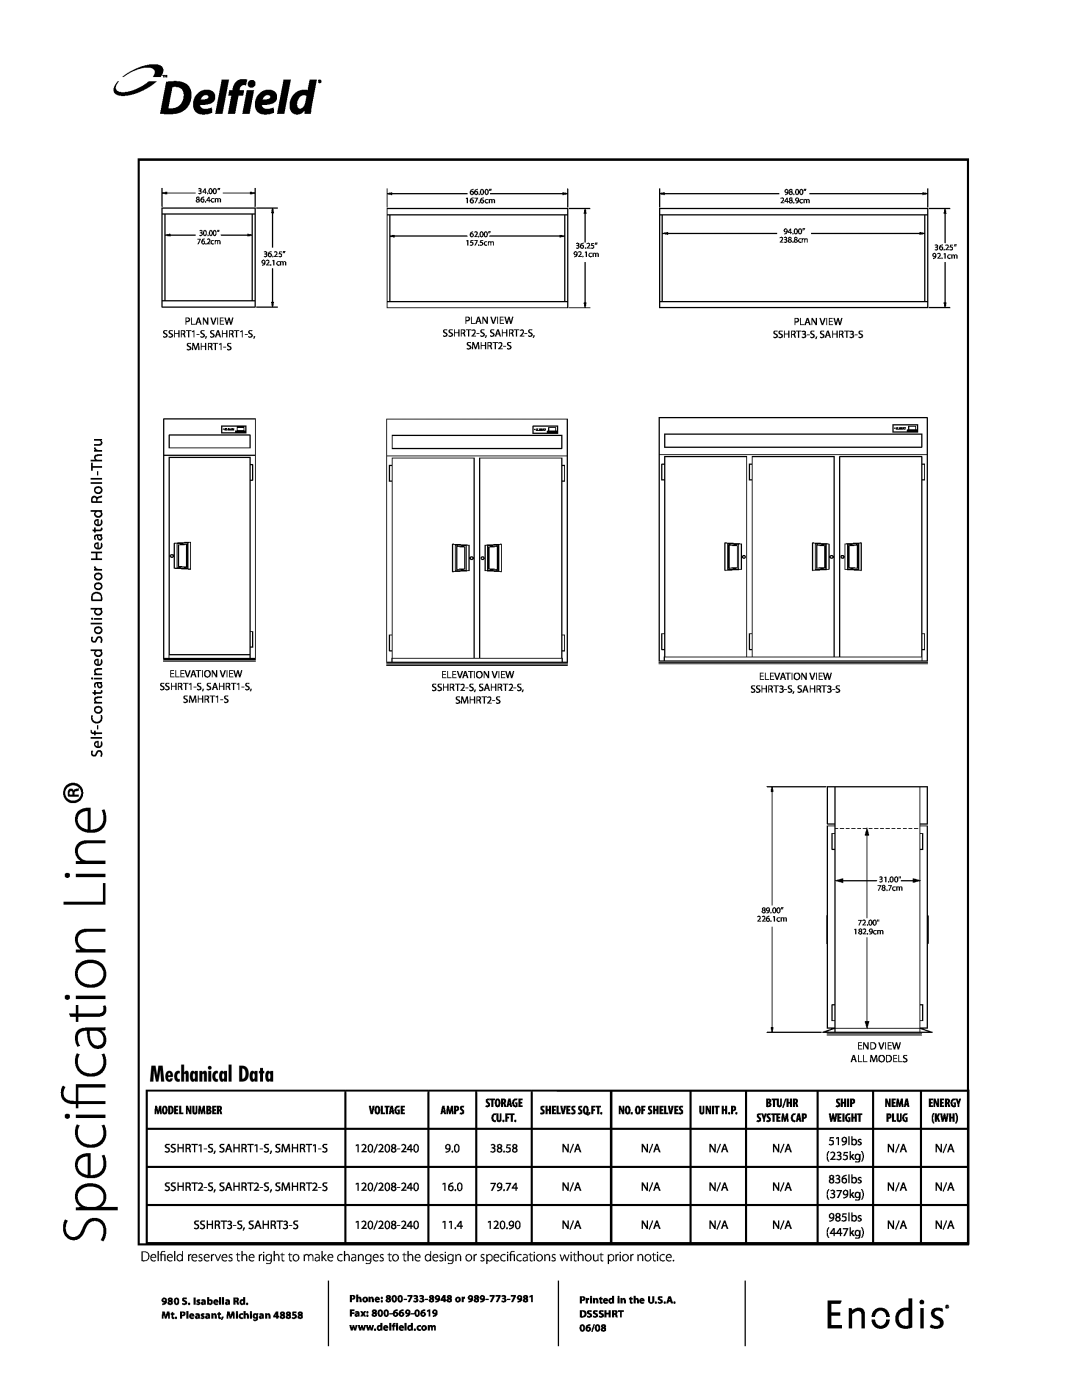 Delfield SSHRT-S prior notice, Delfield, Specification Line, Mechanical Data, Self-Contained Solid Door Heated Roll-Thru 